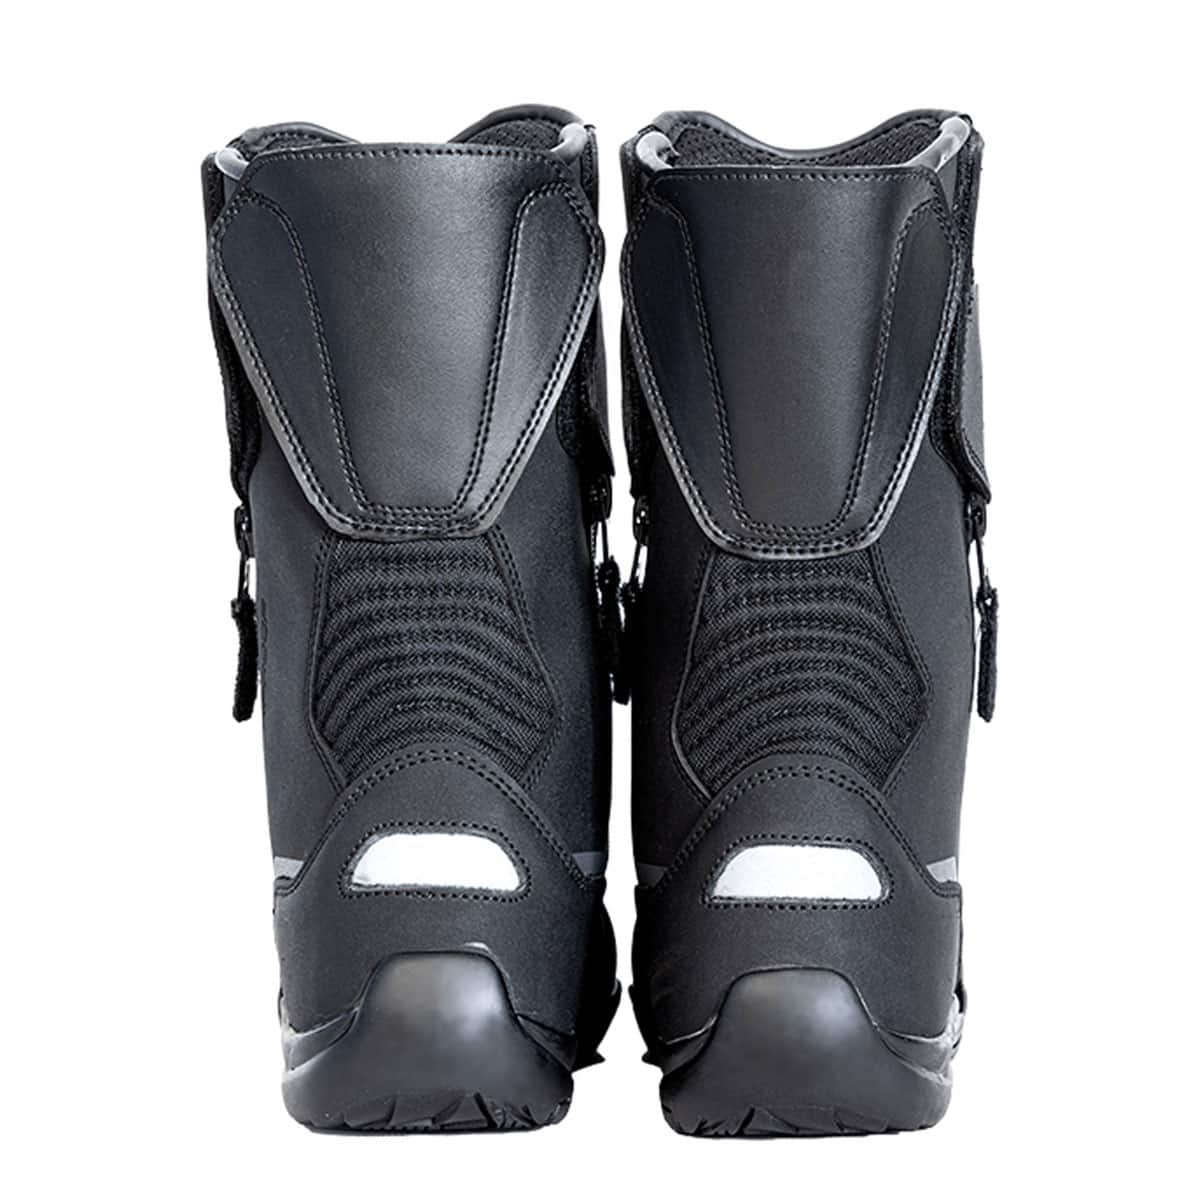 Richa waterproof long touring boots with double zip opening for ease - back